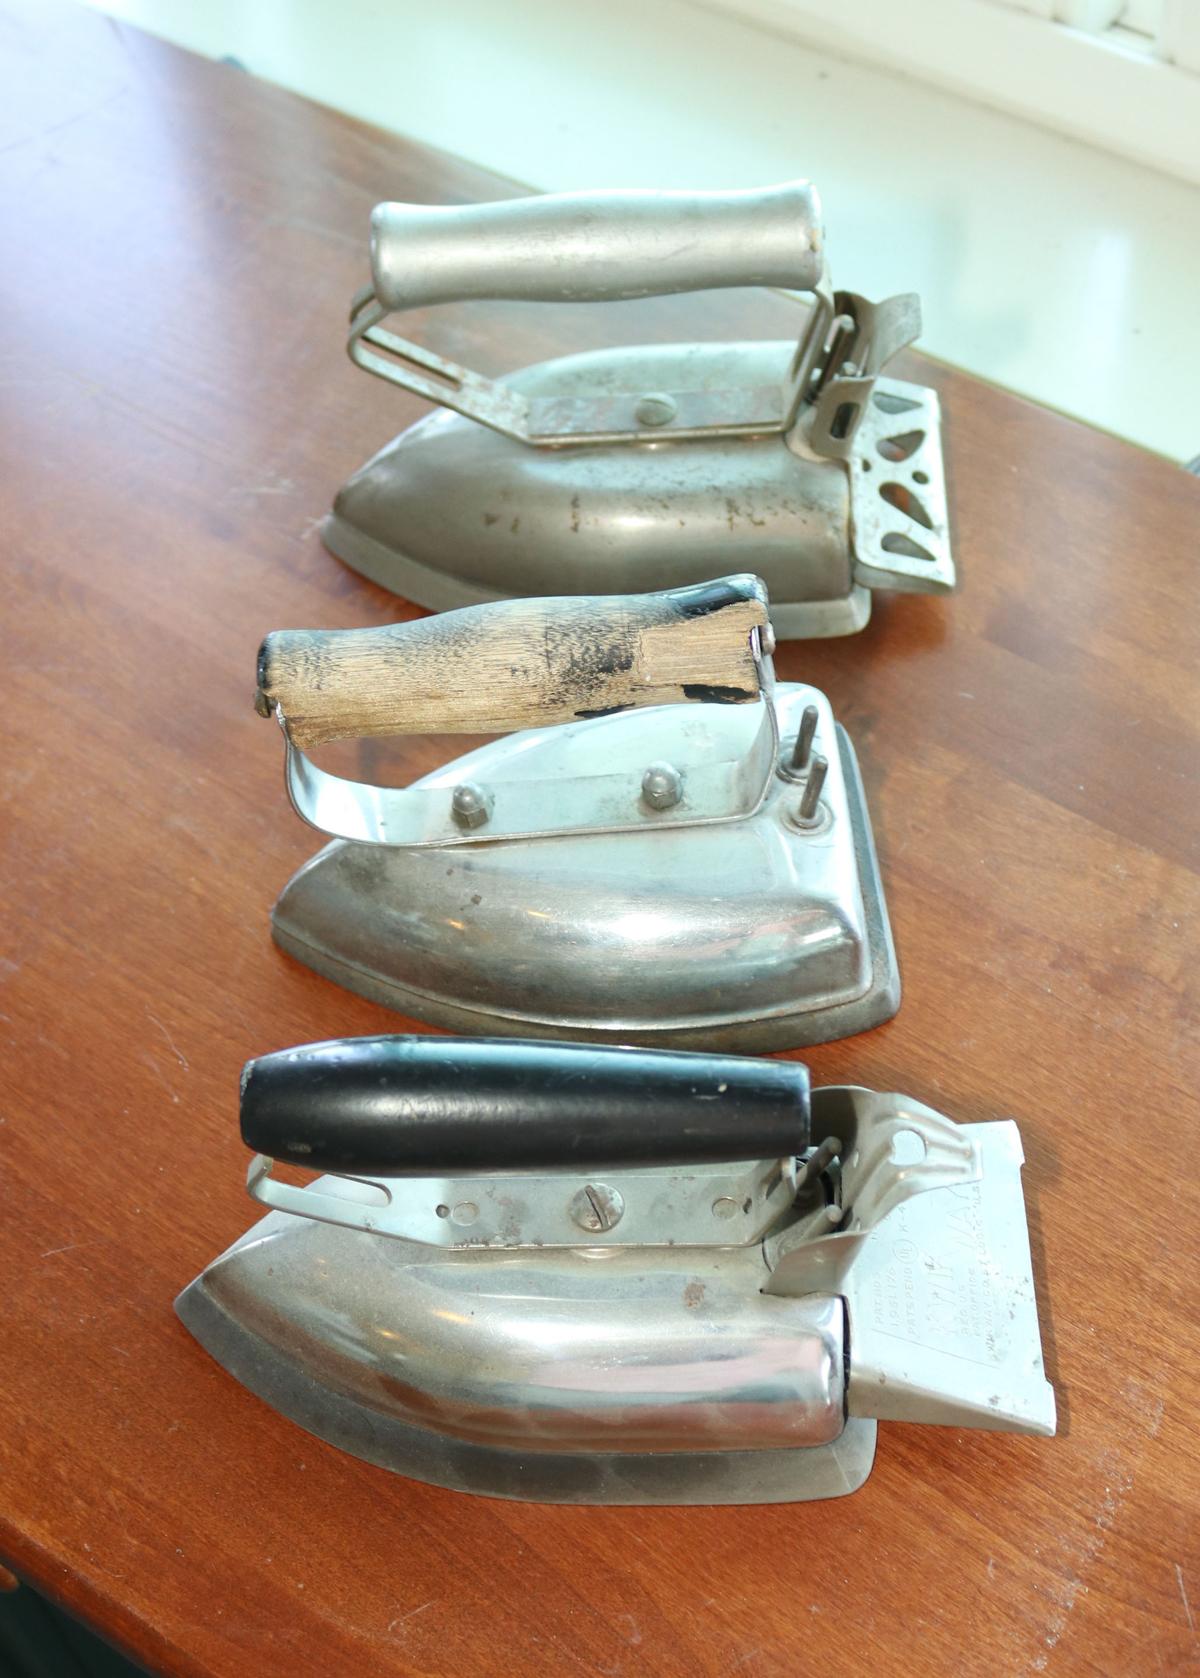 3 Vintage Electric Irons